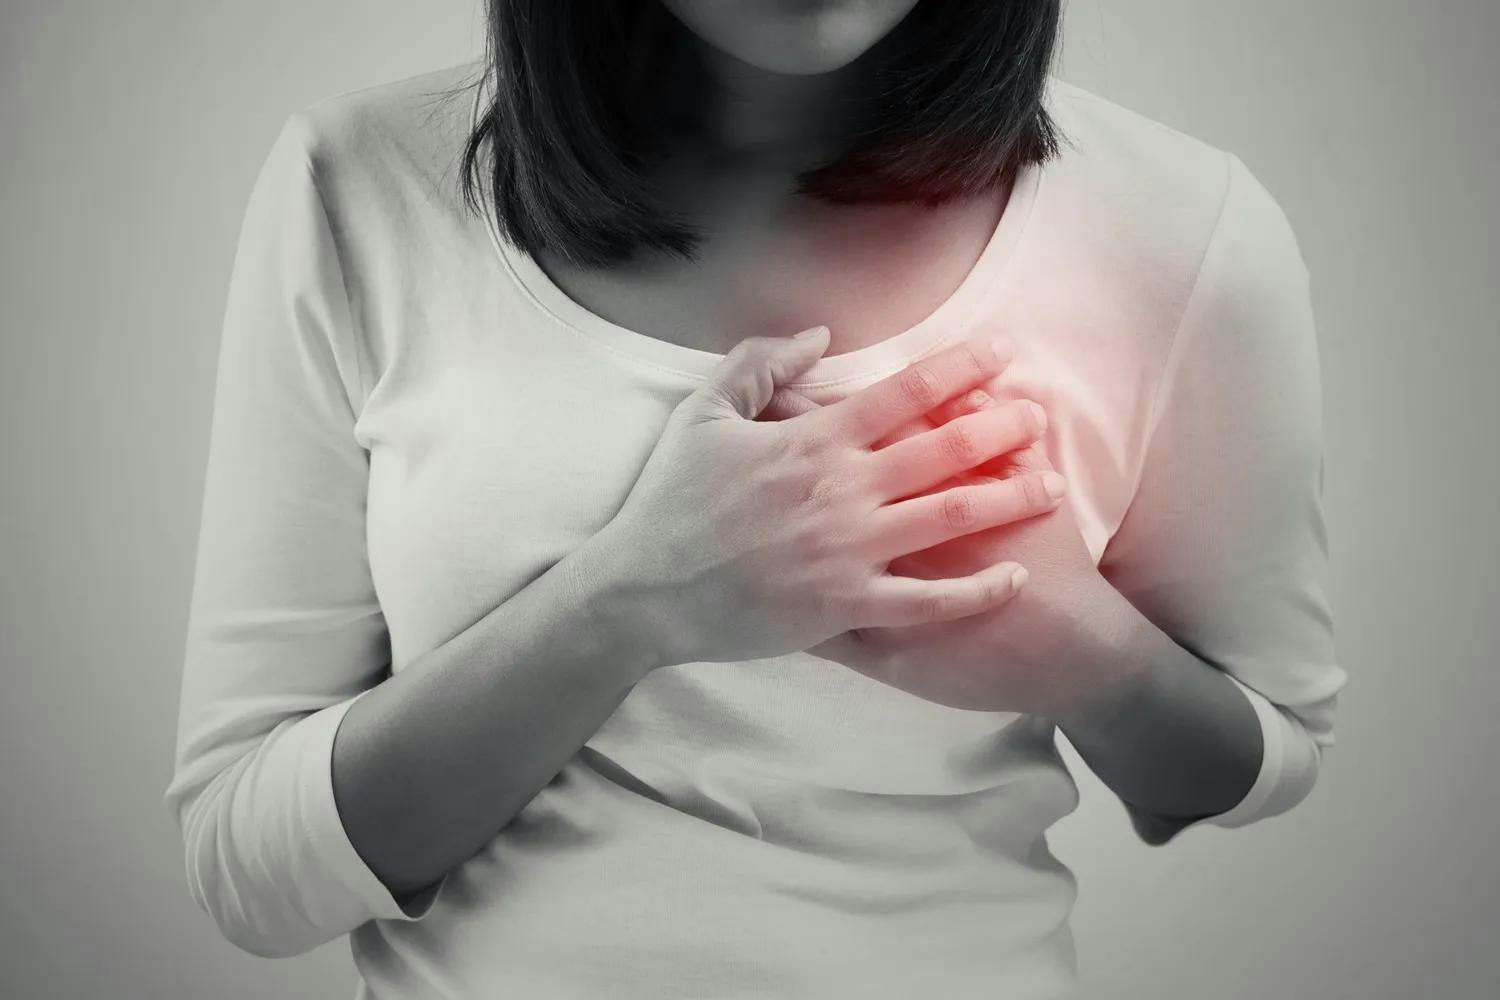 Hormone shift in menopause contributes to cardiovascular risk in aging women